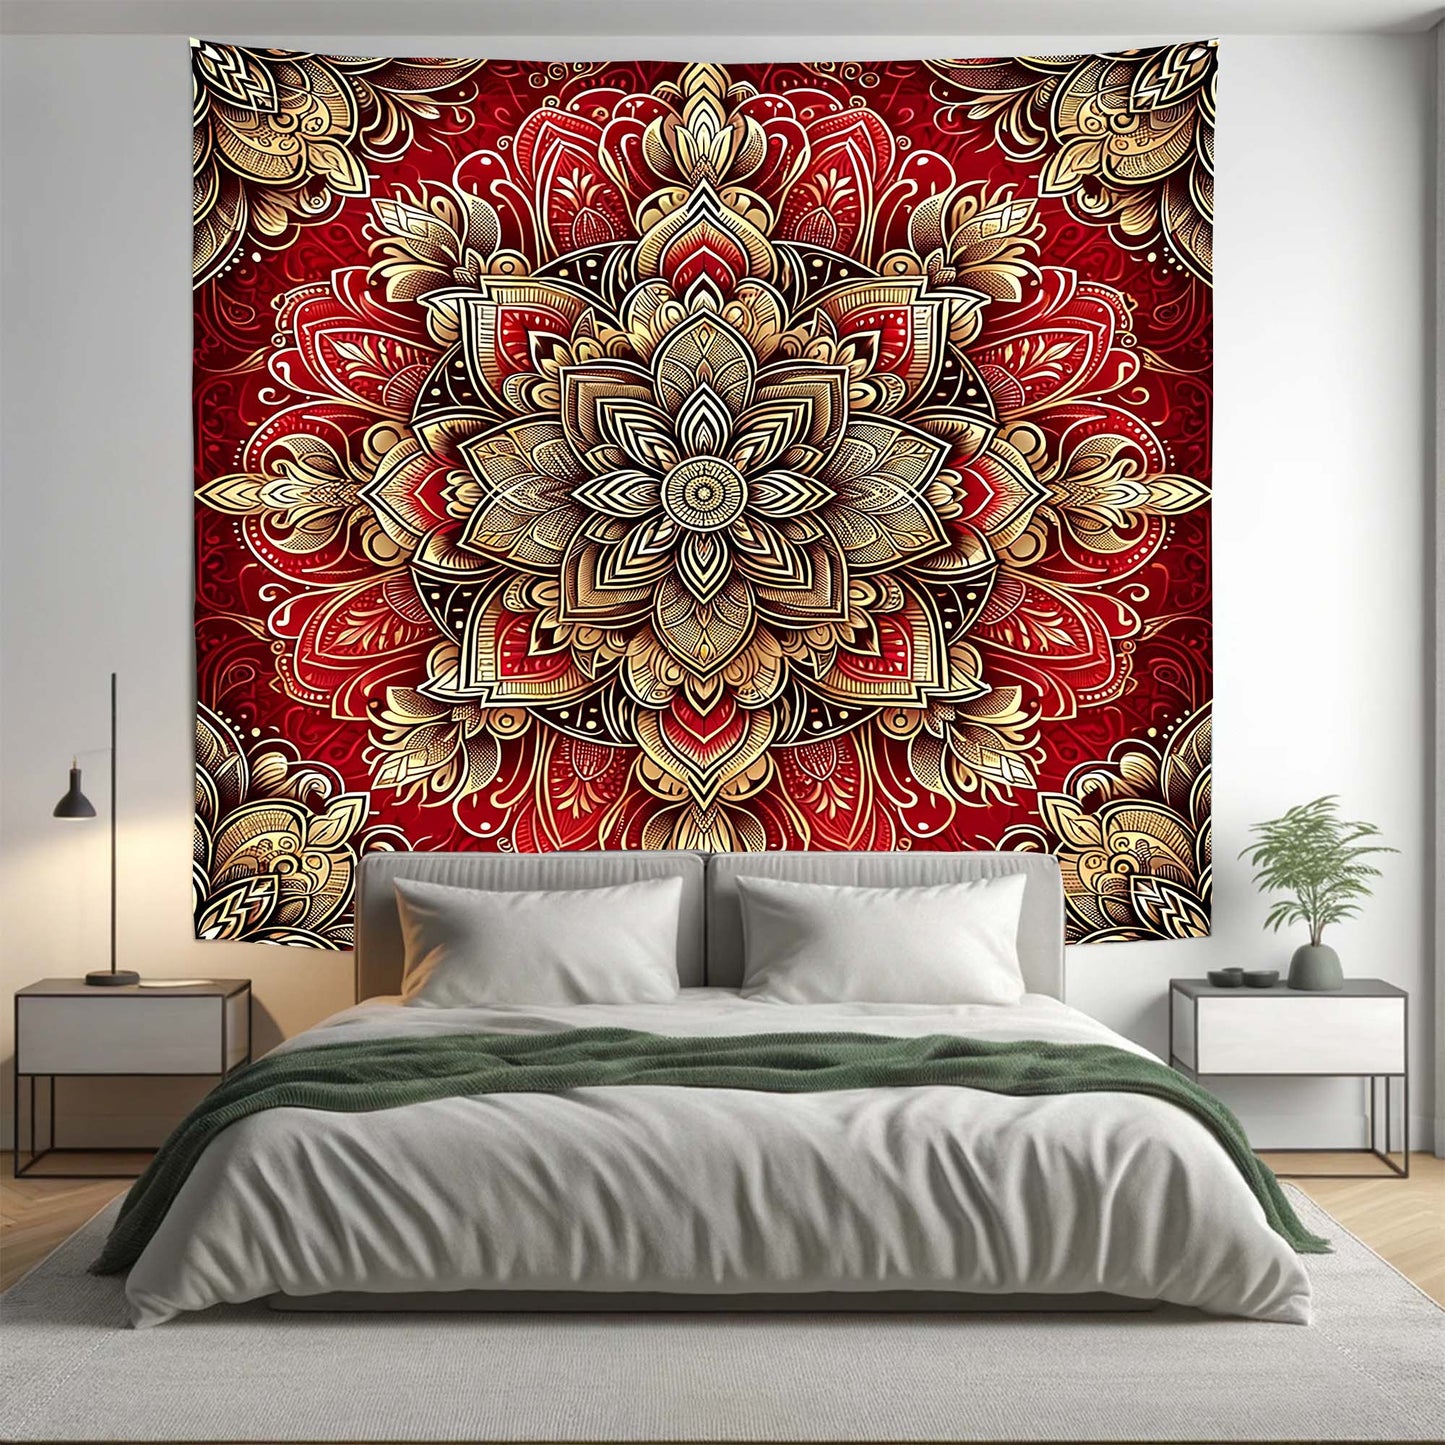 Bohemian Red Gold ABS Floral Mandala Tapestry Psychedelic Wall Hanging Boho Decor